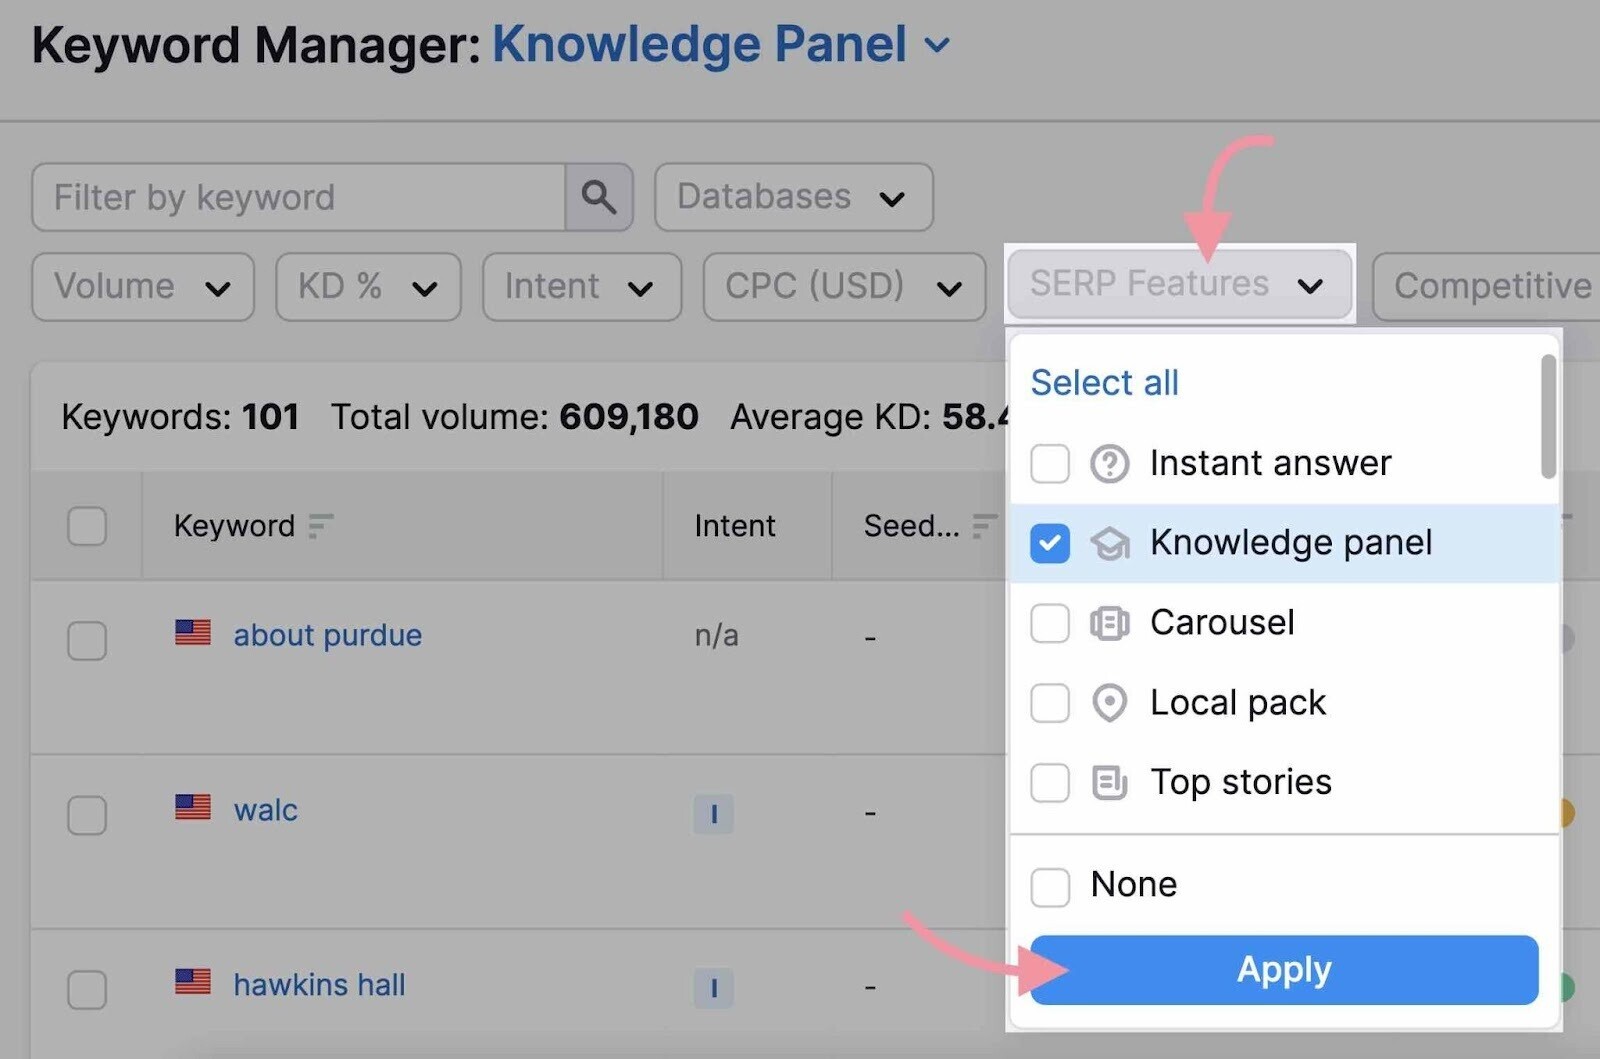 Apply "Knowledge panel" filter